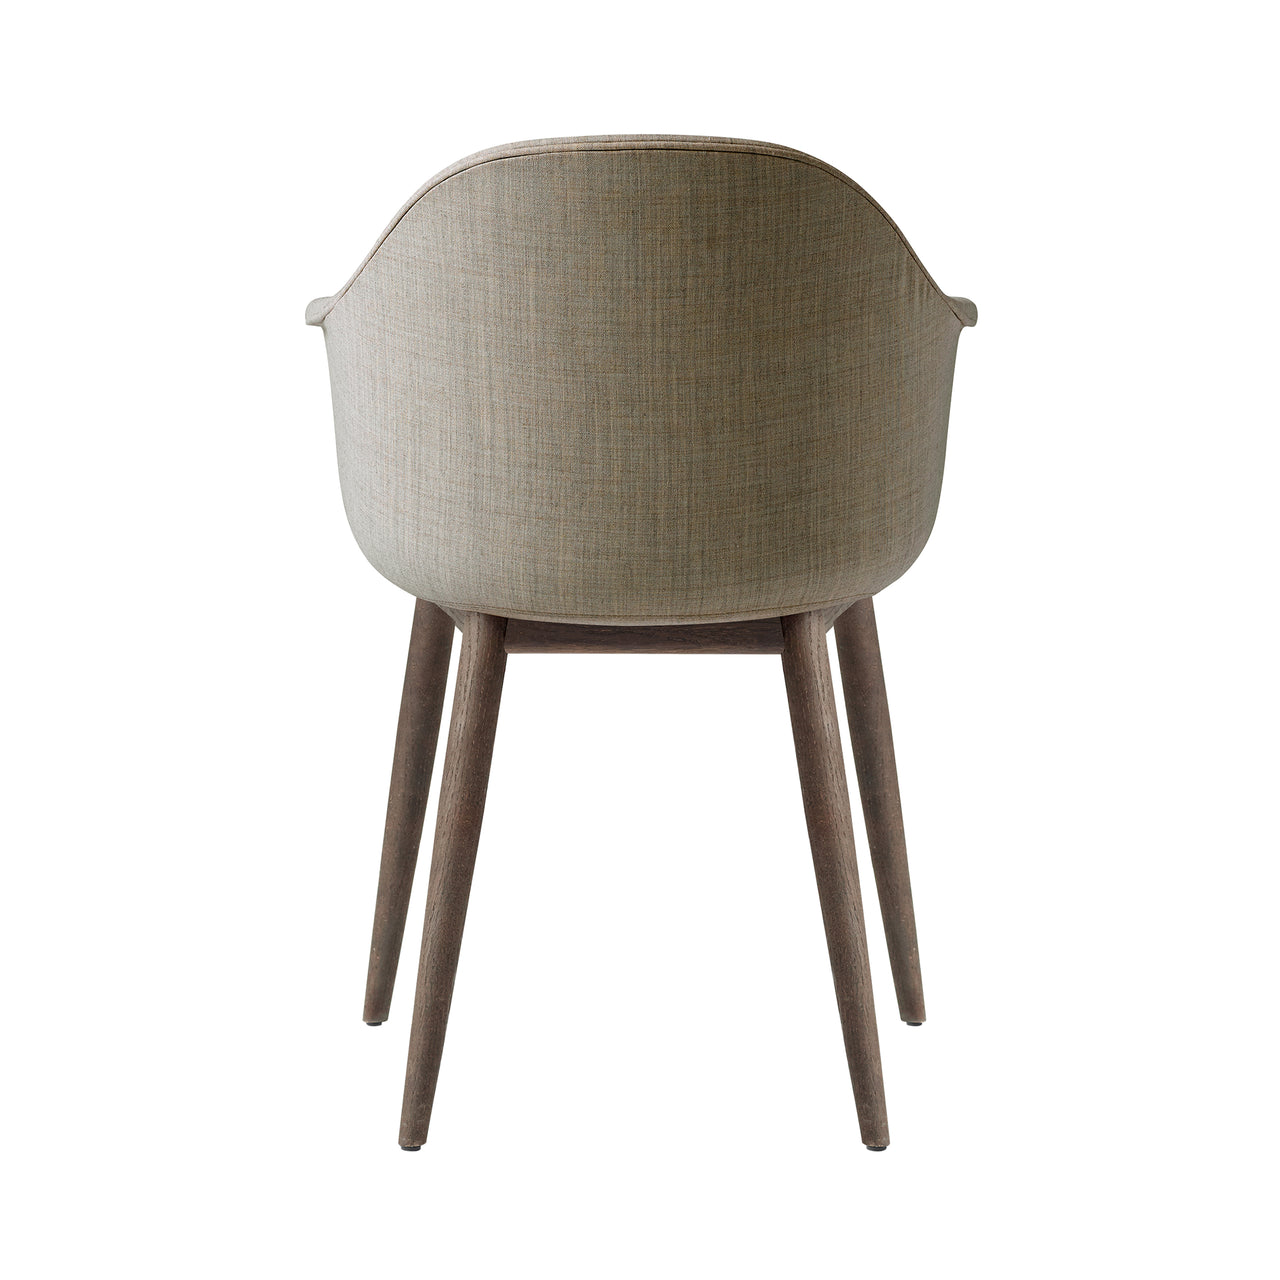 Harbour Dining Chair: Wood Base Upholstered + Dark Stained Oak + Remix3 233